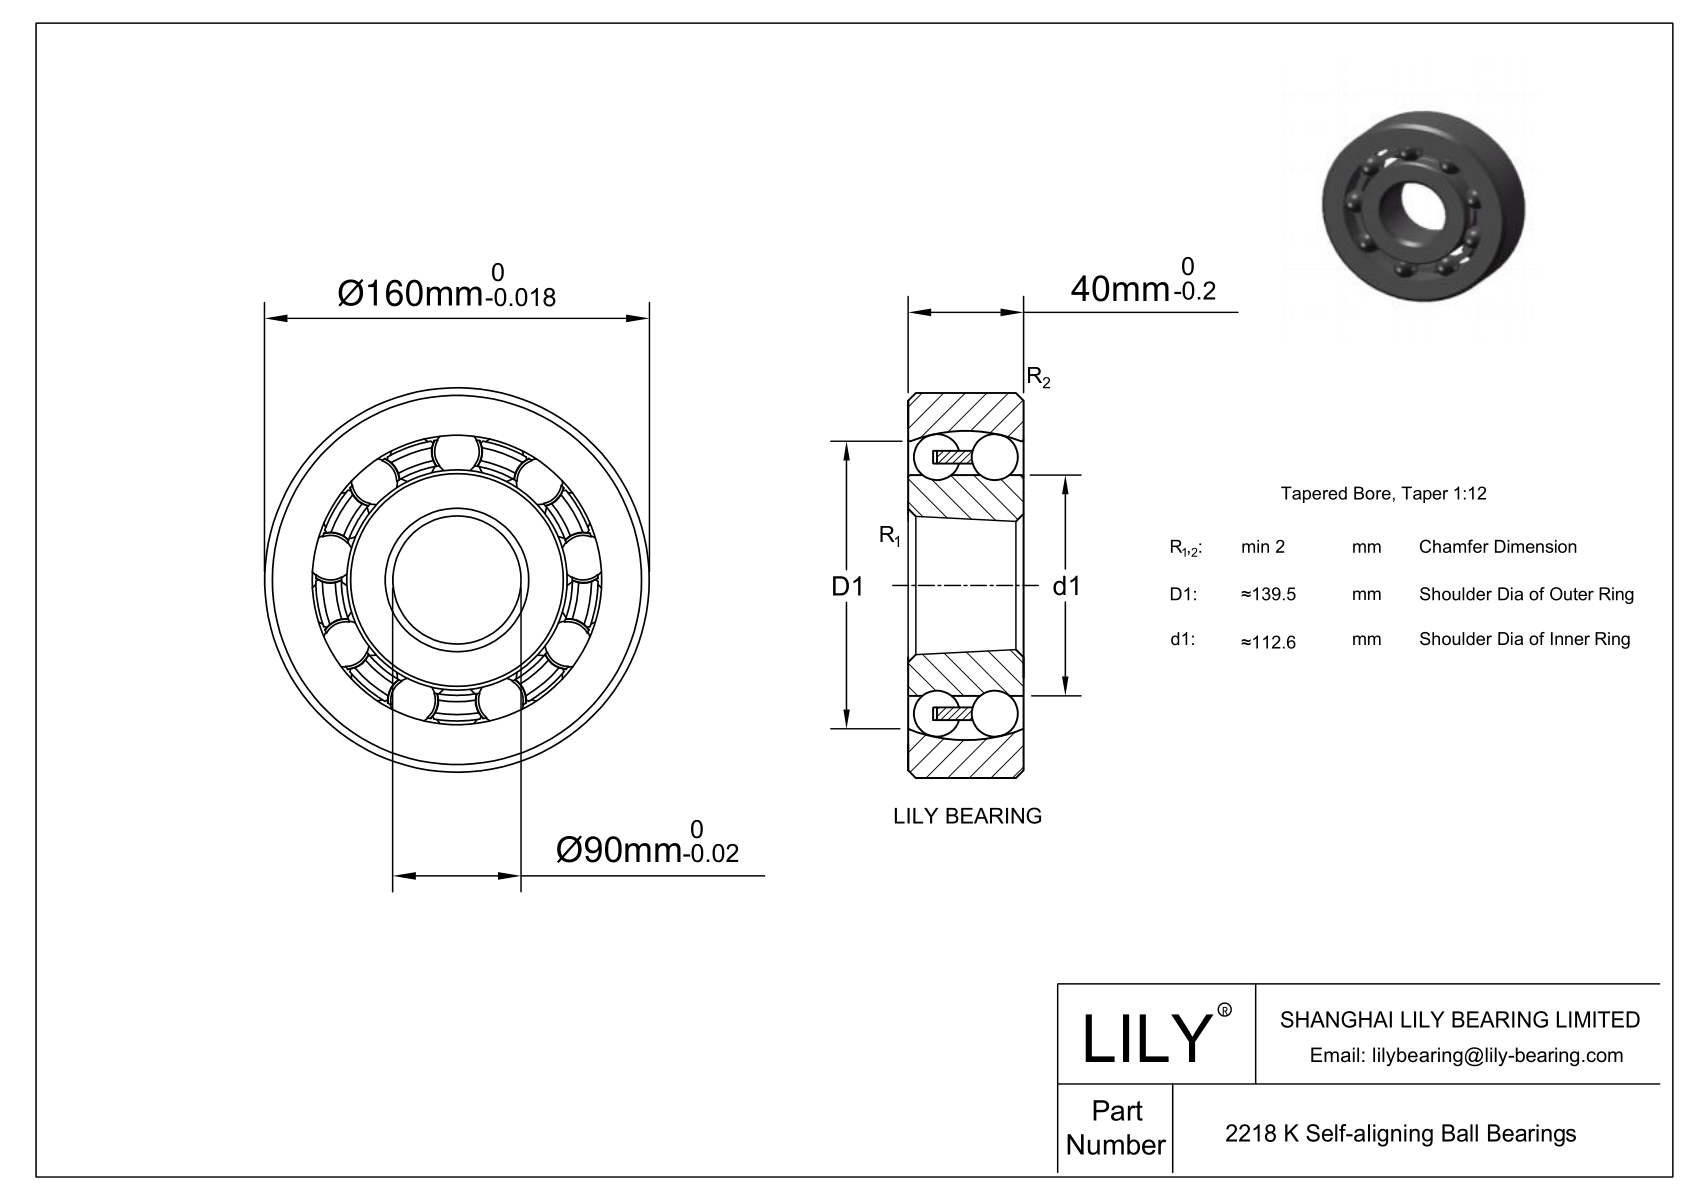 S2218 K Stainless Steel Self Aligning Ball Bearings cad drawing